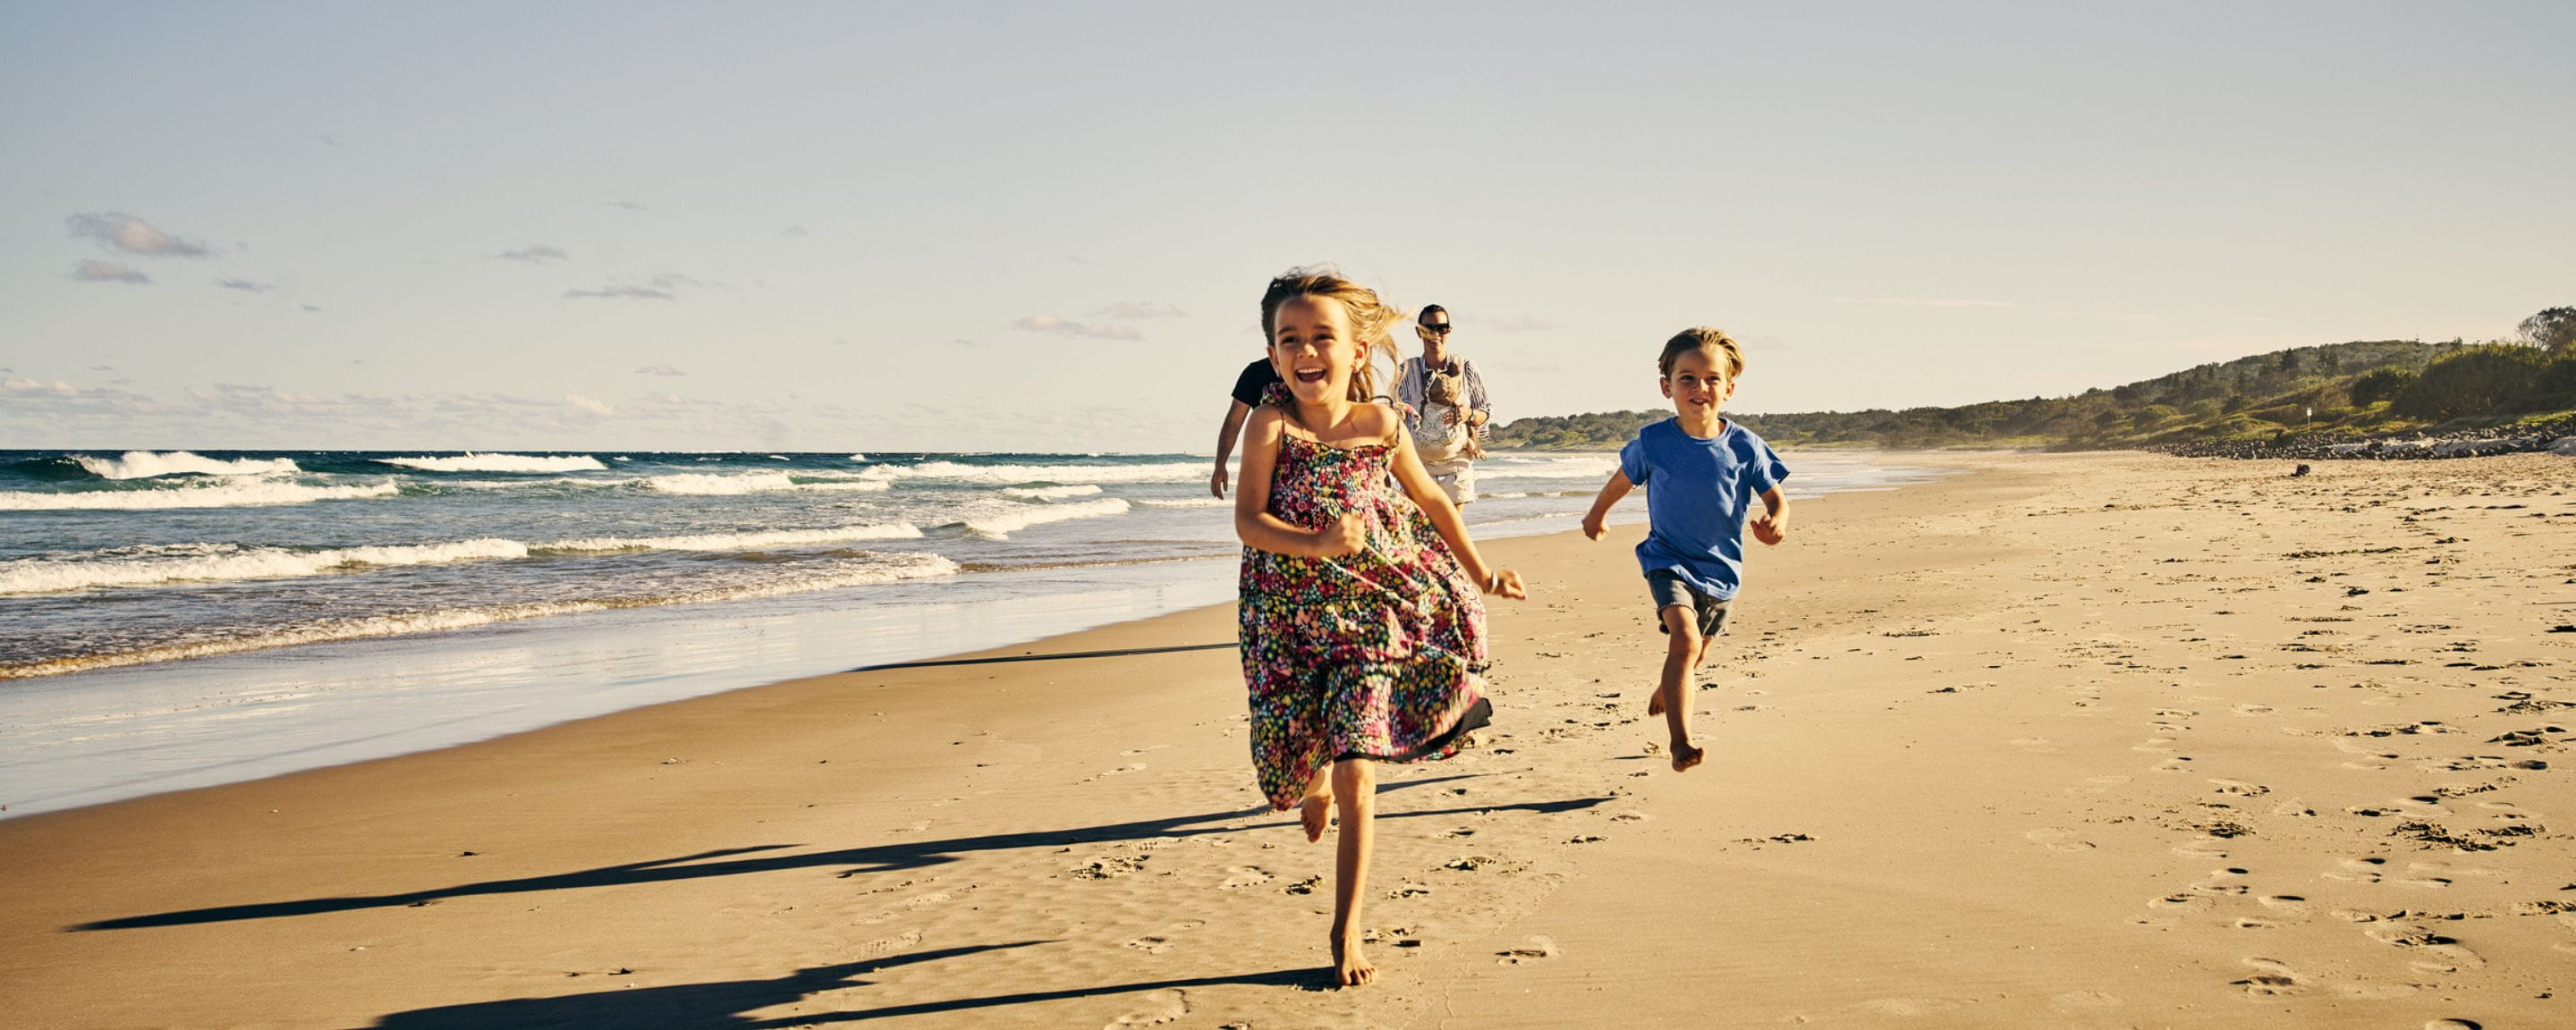 kids running on a beach with their parents behind